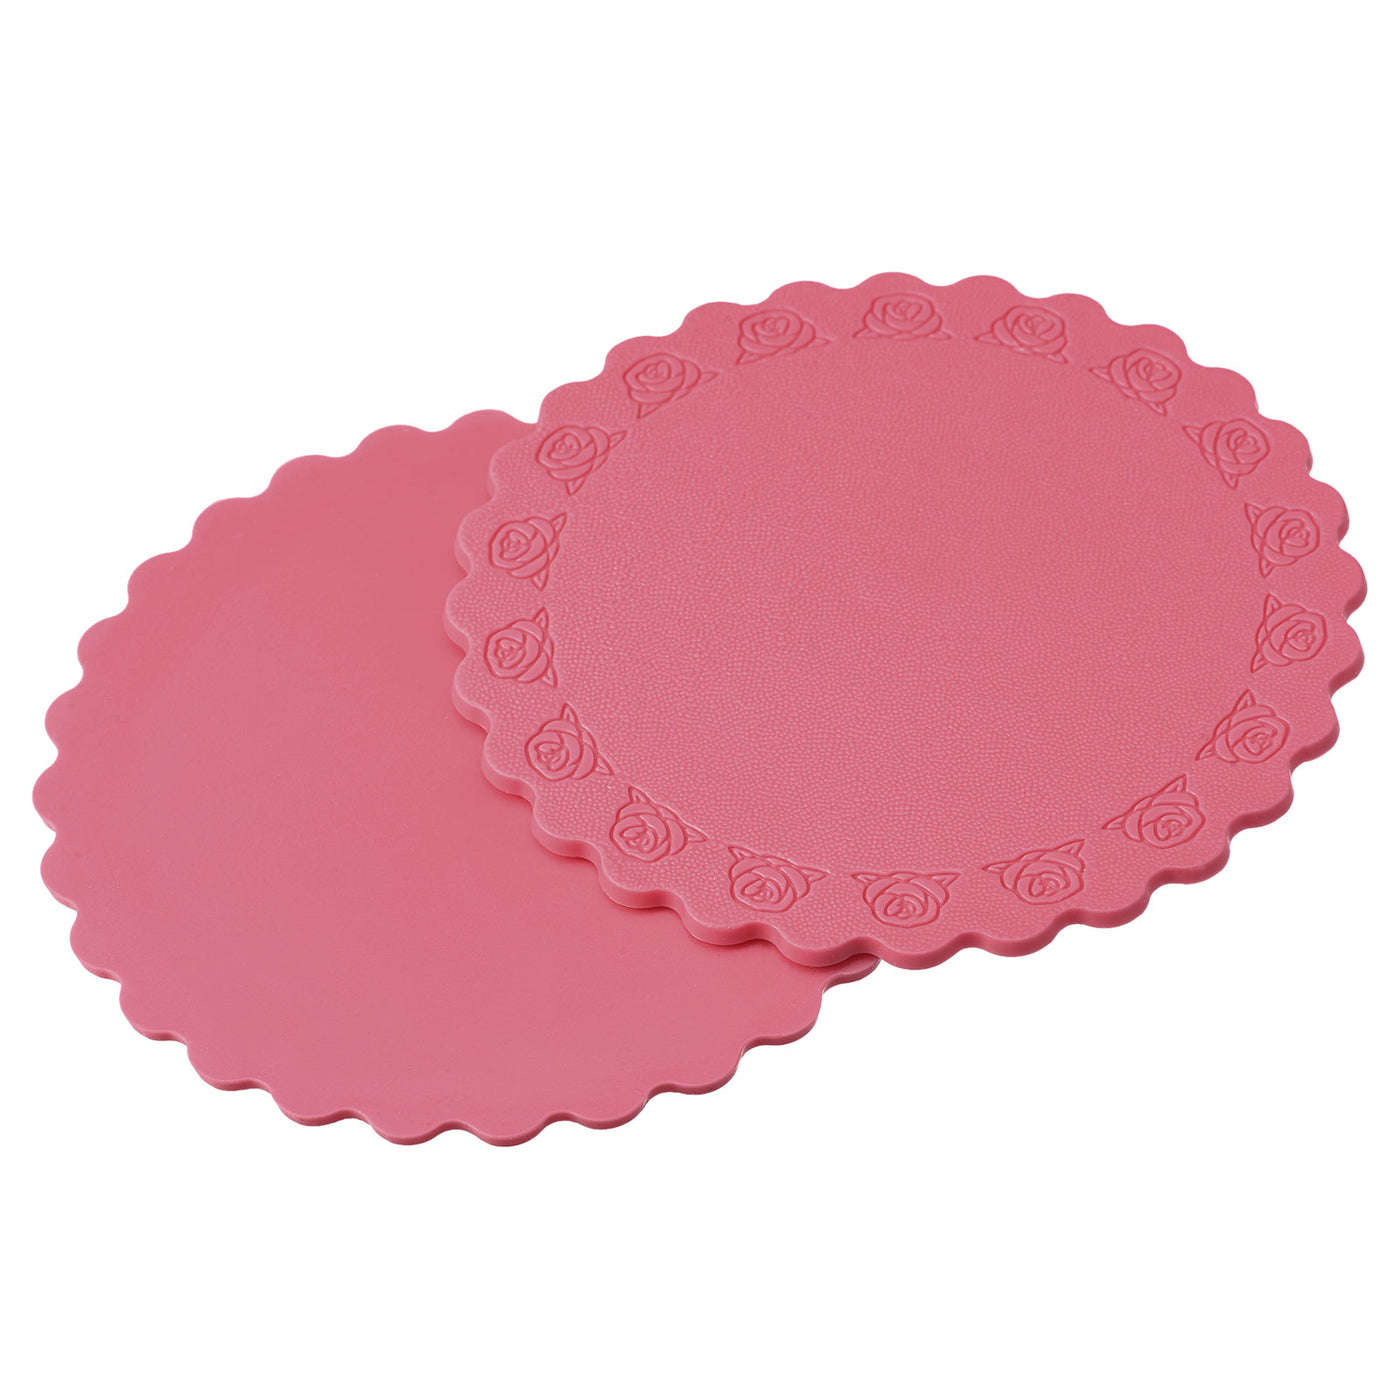 uxcell Uxcell 105mm(4.13") Round Coasters Soft PVC Cup Mat Pad for Tableware Pink 4pcs